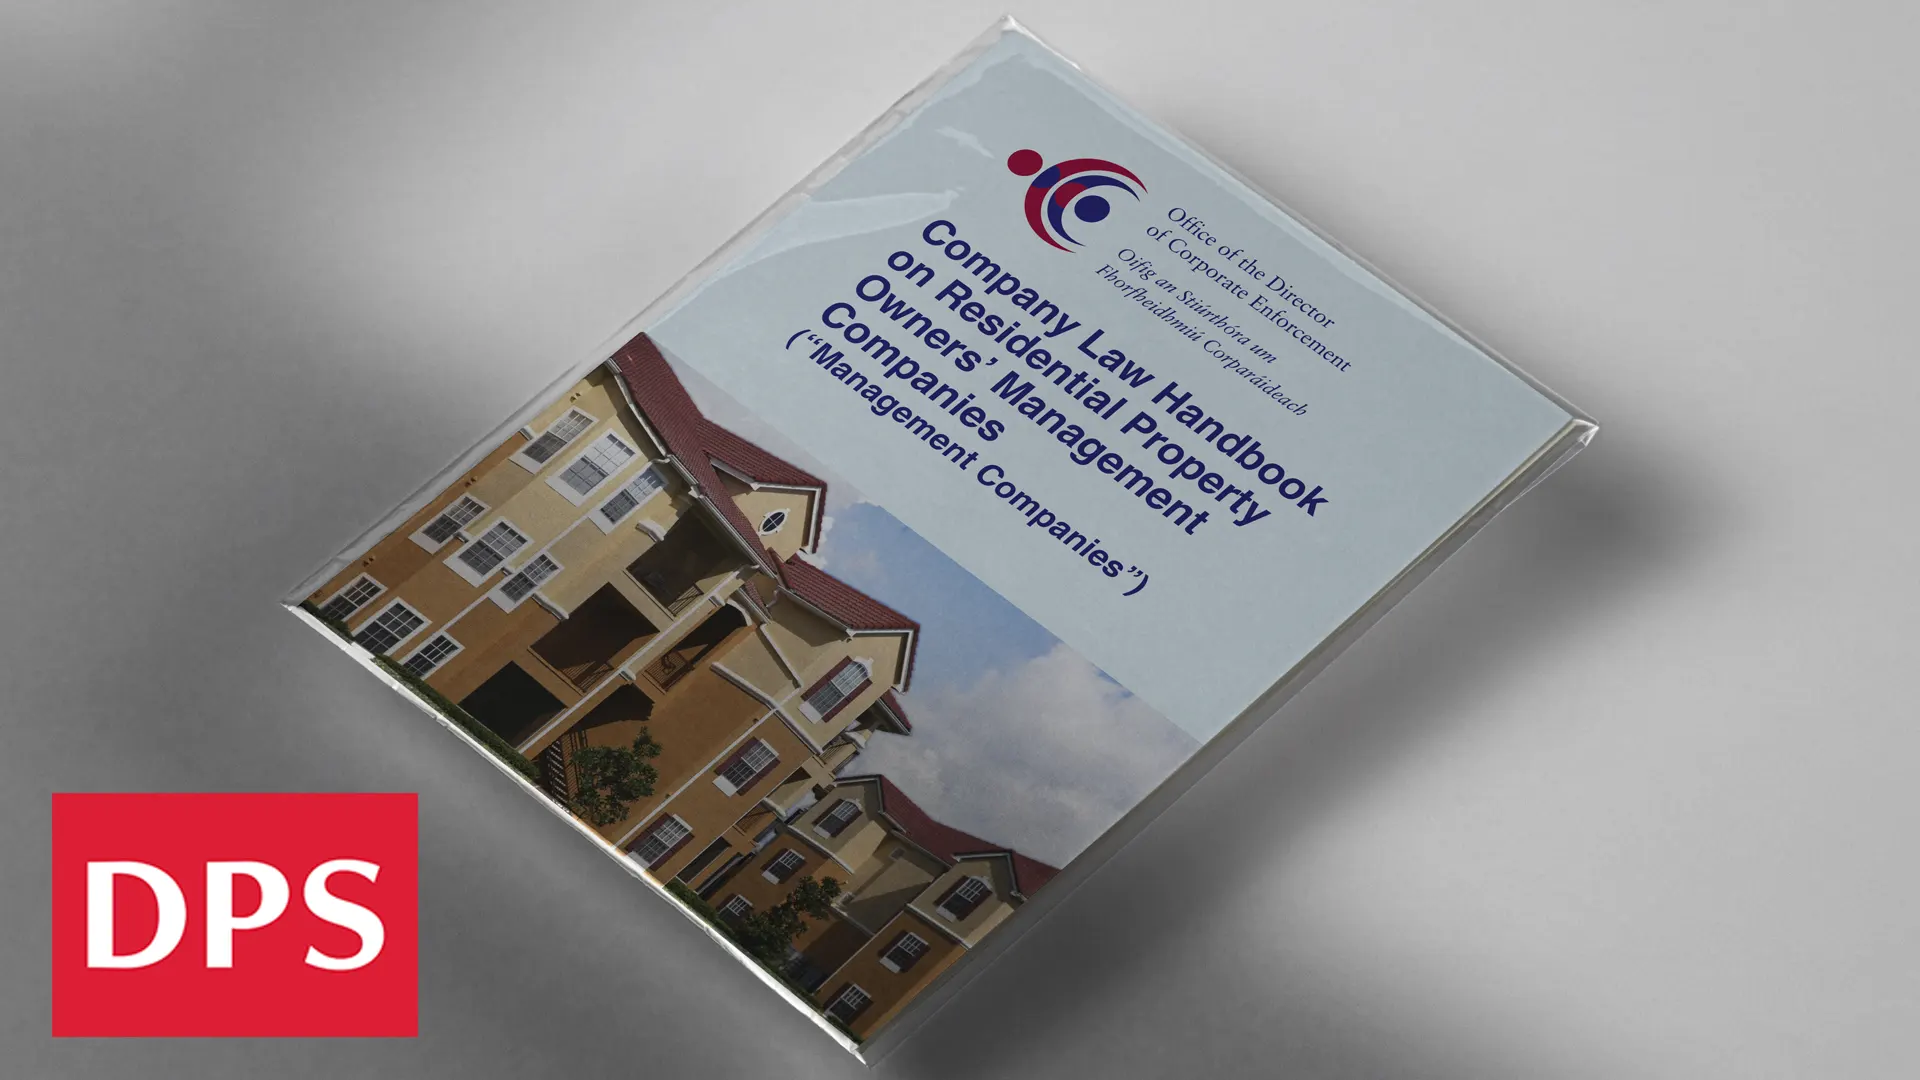 Company Law Handbook on Residential Property Owners' Management Companies